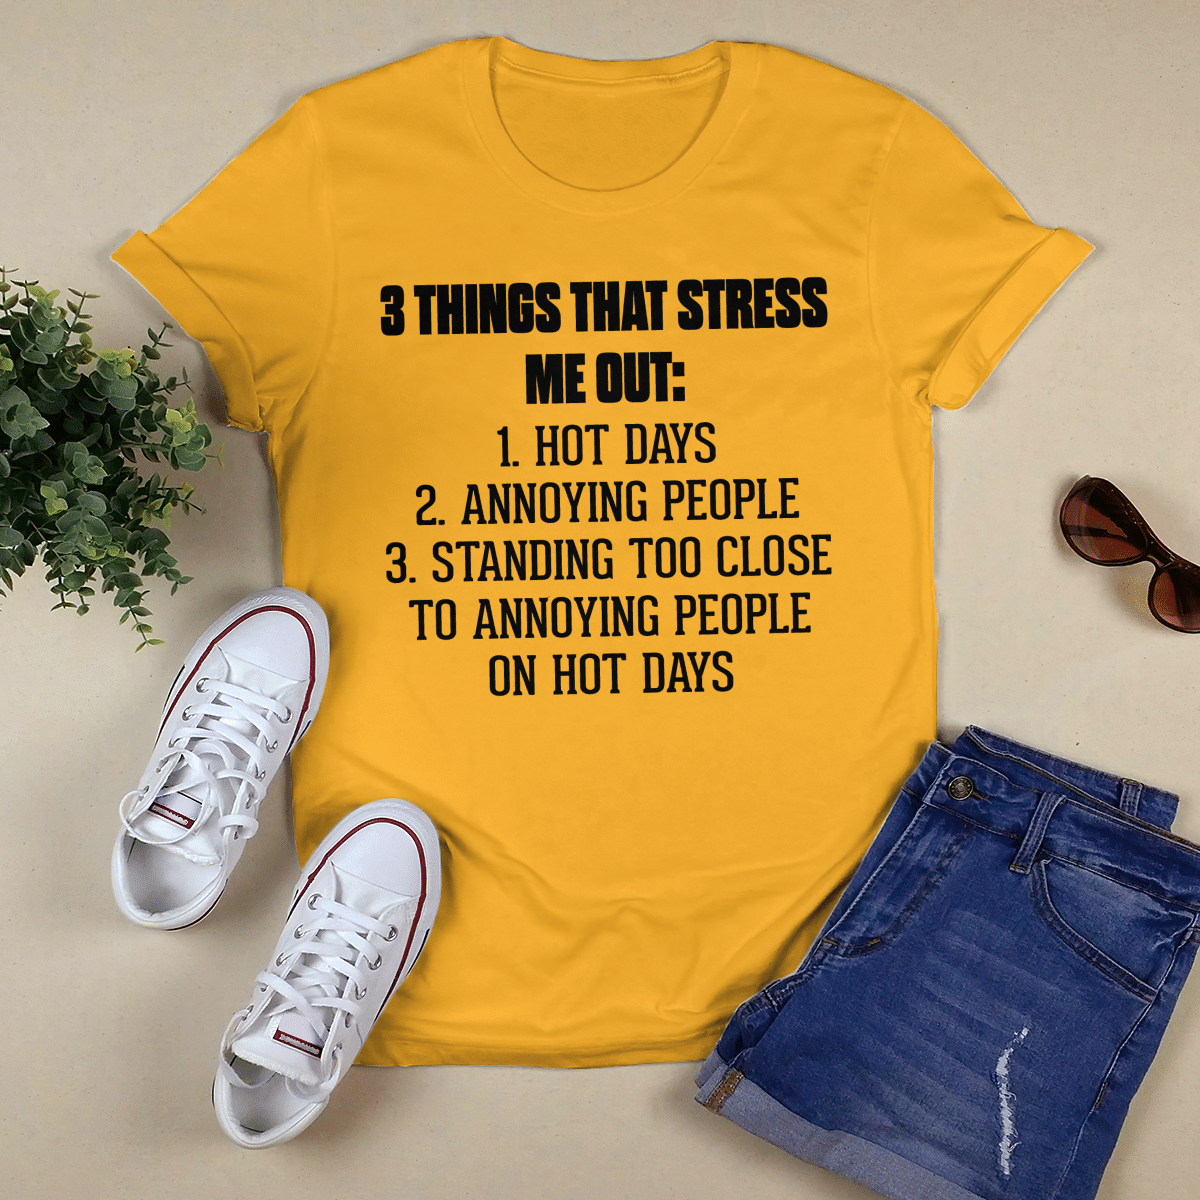 3 Things That Stress Me Out shirt